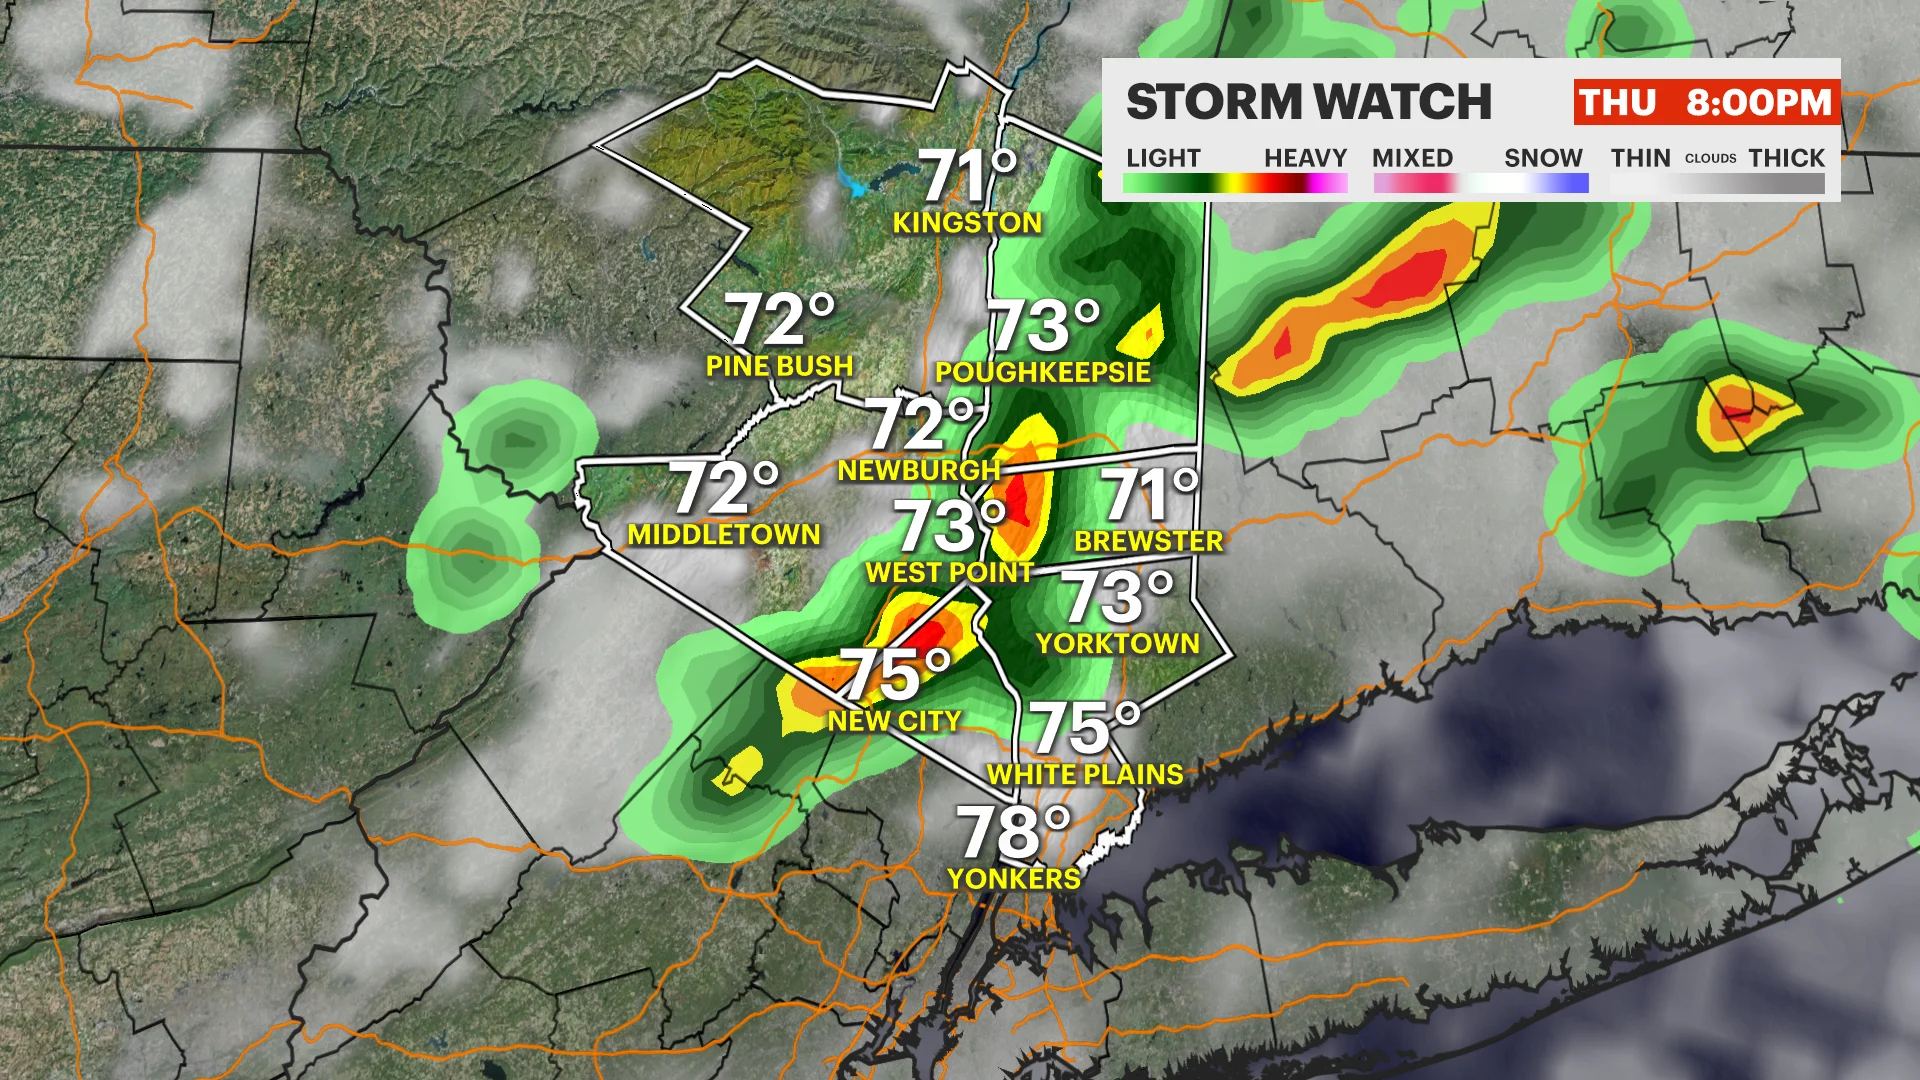 Storm Watch: Pop-up thunderstorms could bring gusty downpours today, decent weekend ahead